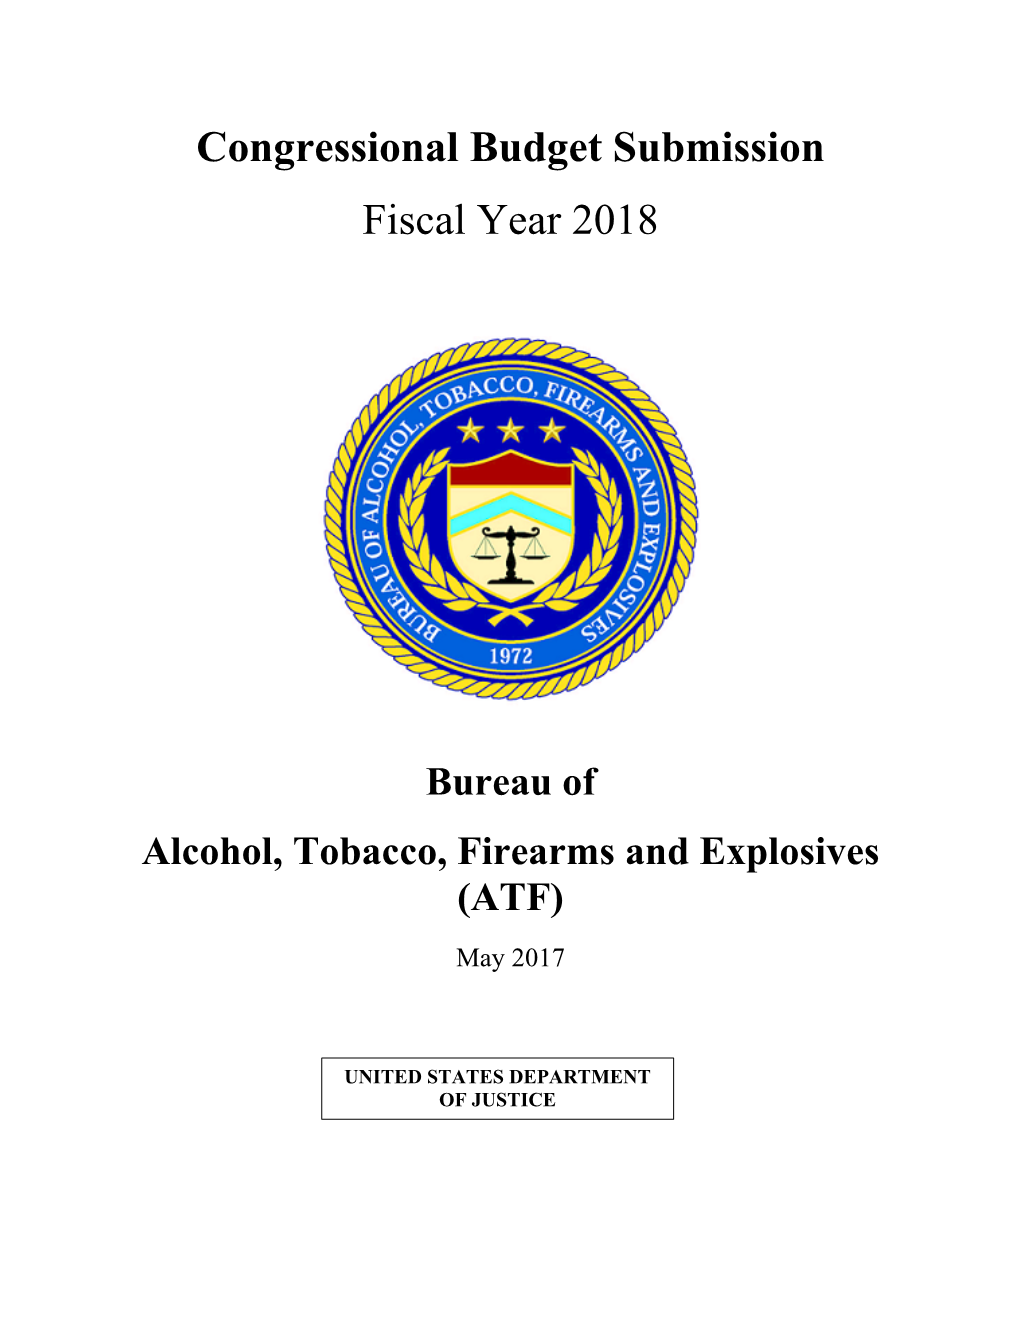 Bureau of Alcohol, Tobacco, Firearms and Explosives (ATF) May 2017